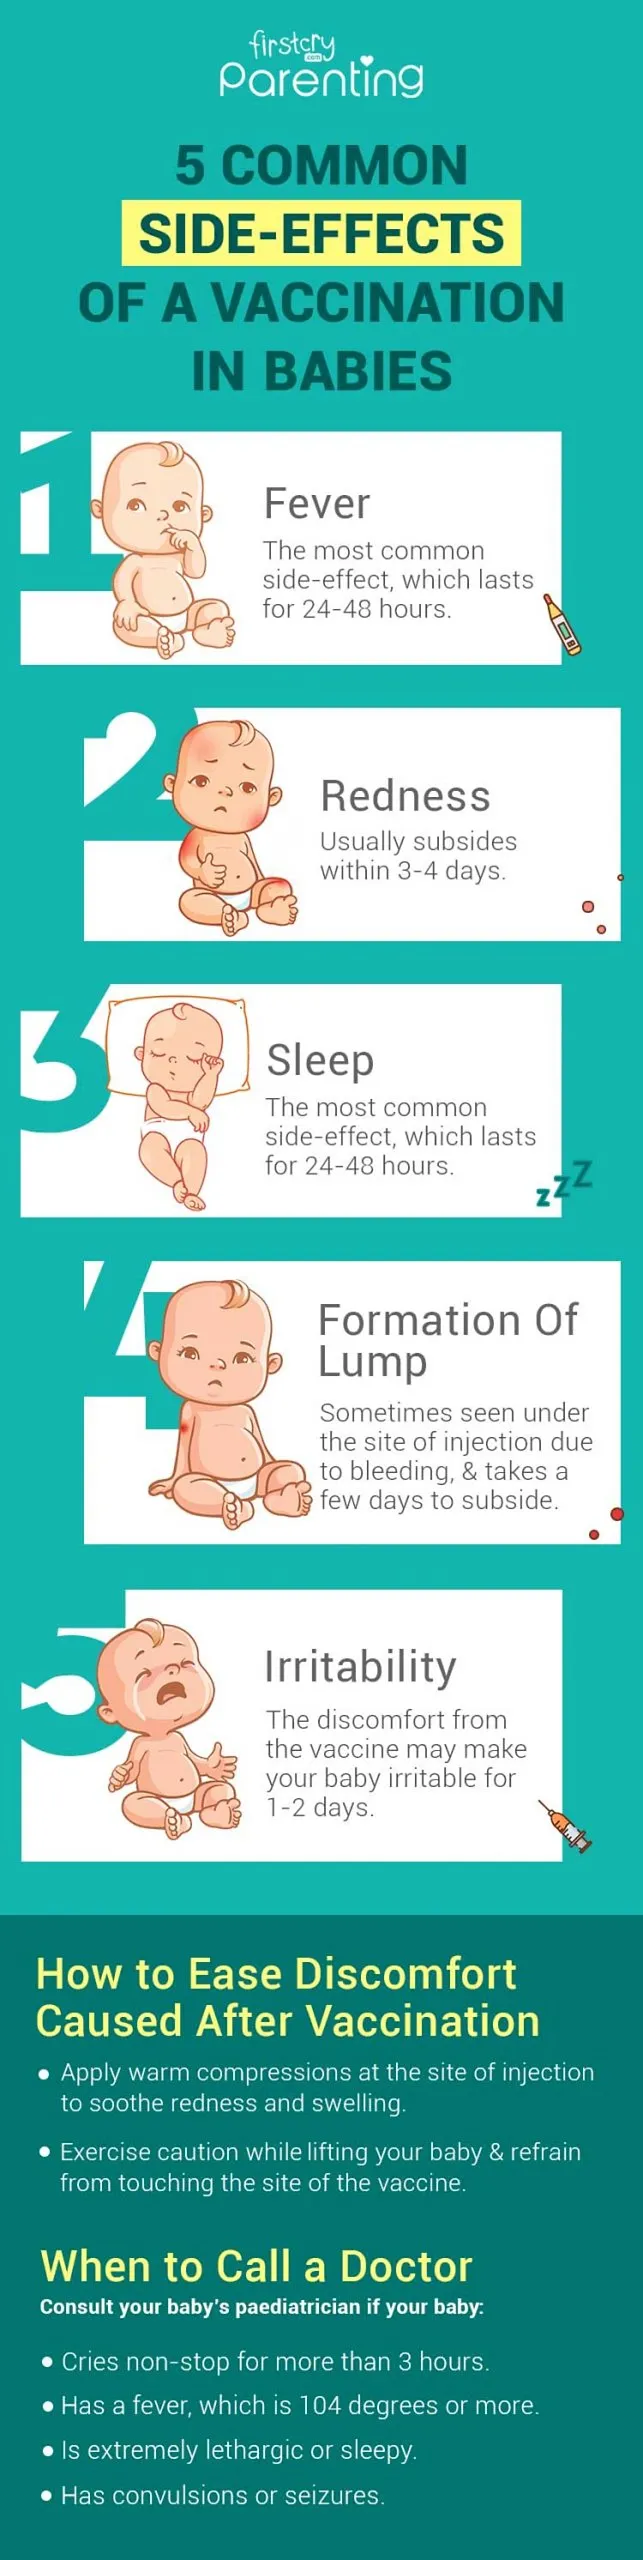 5 Common Side-Effects of a Vaccination in Babies